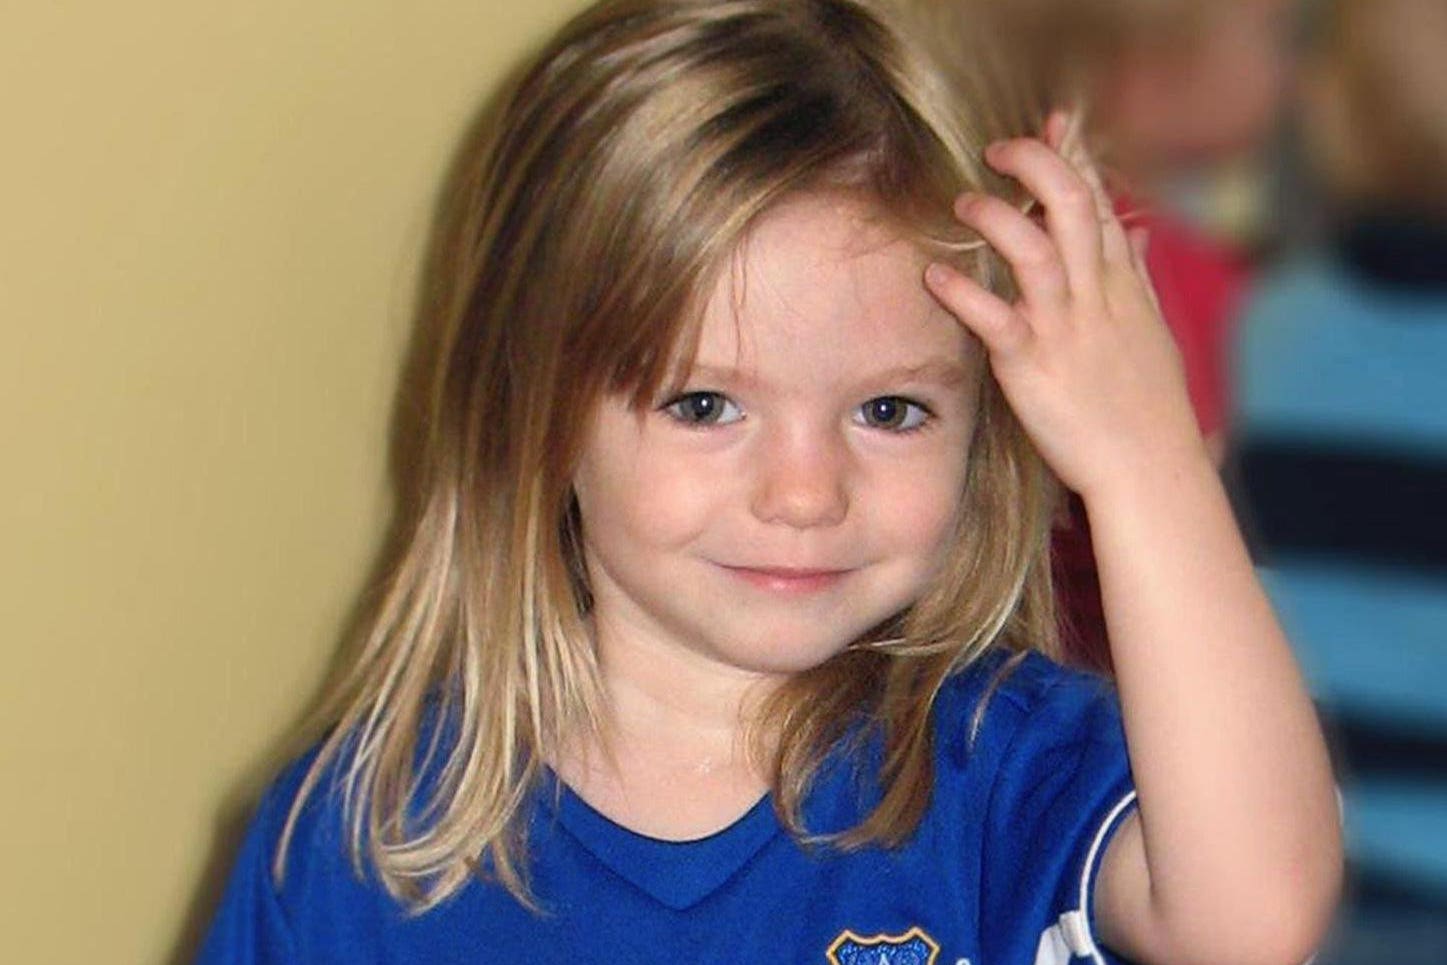 Madeleine McCann disappeared without a trace 16 years ago